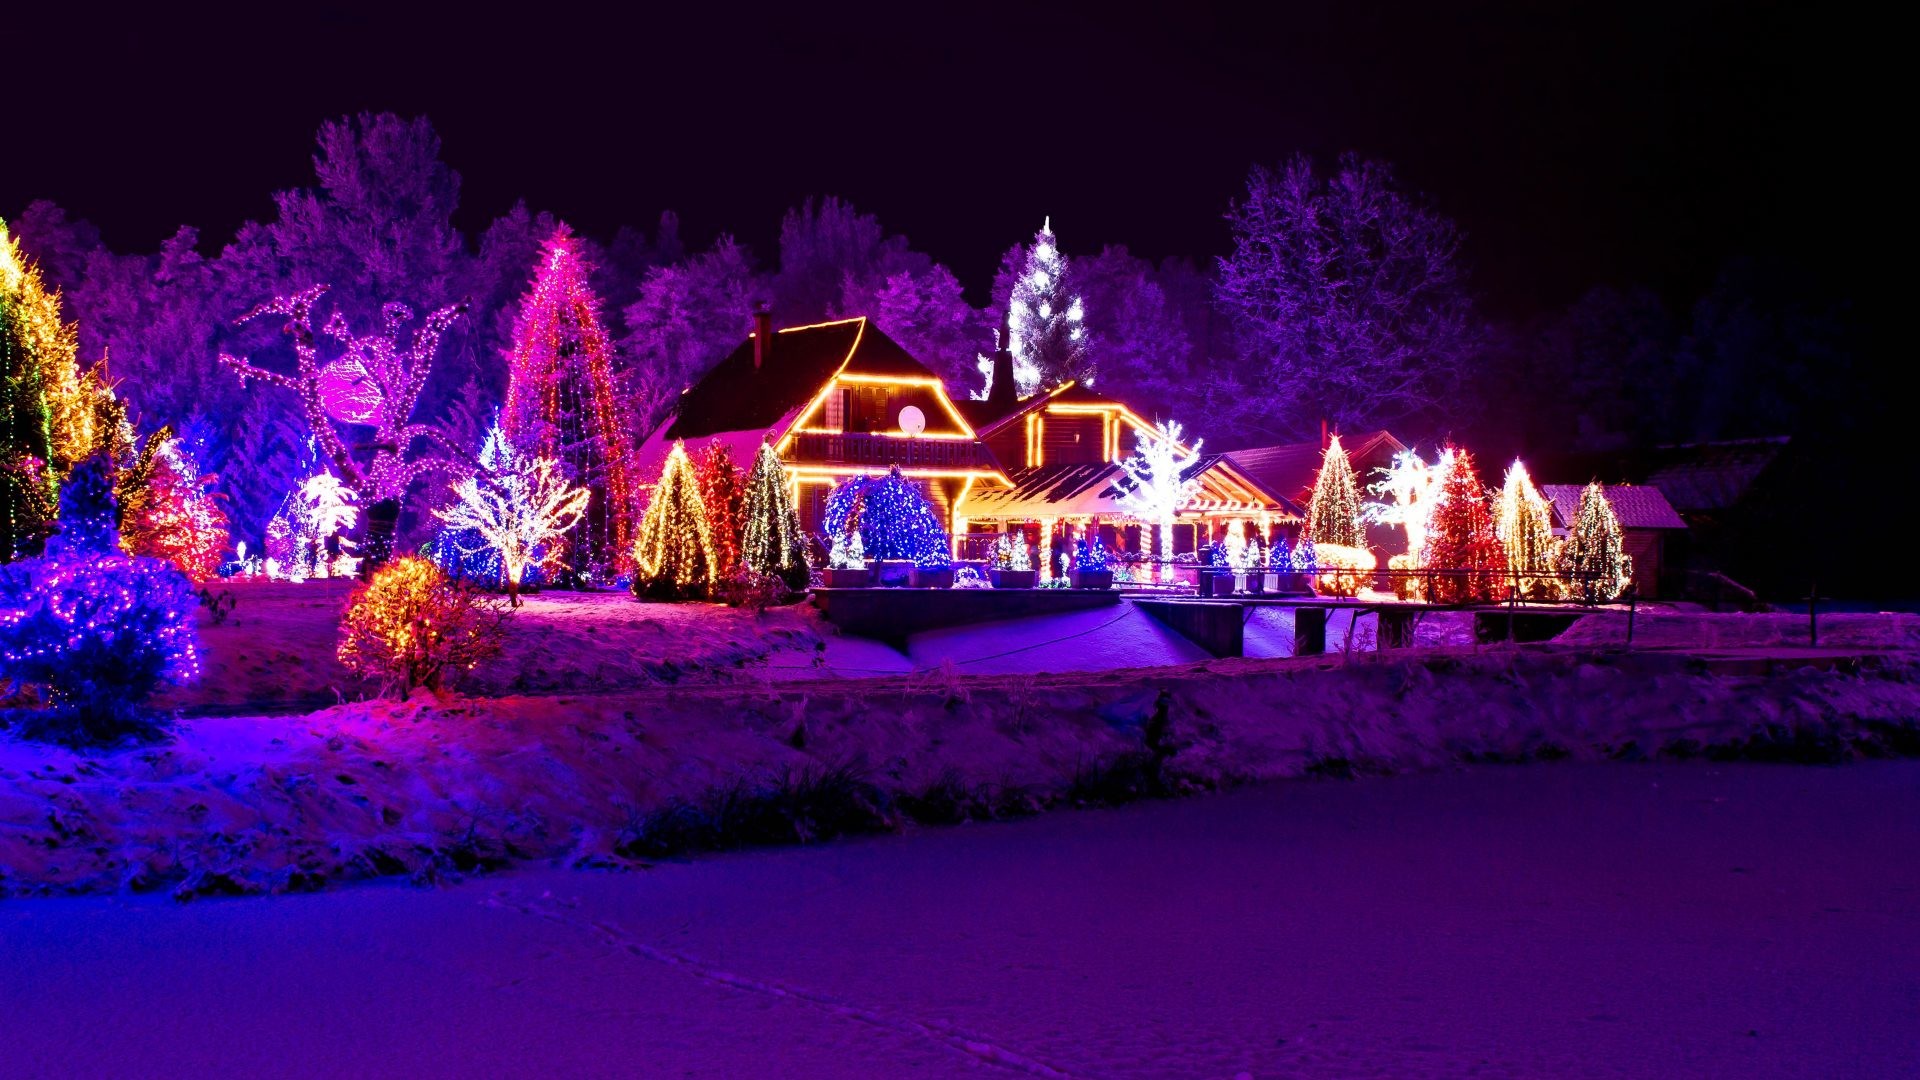 1920x1080 Winter snow magic time xmas snowy lights merry christmas evening houses  wallpaper landscape .